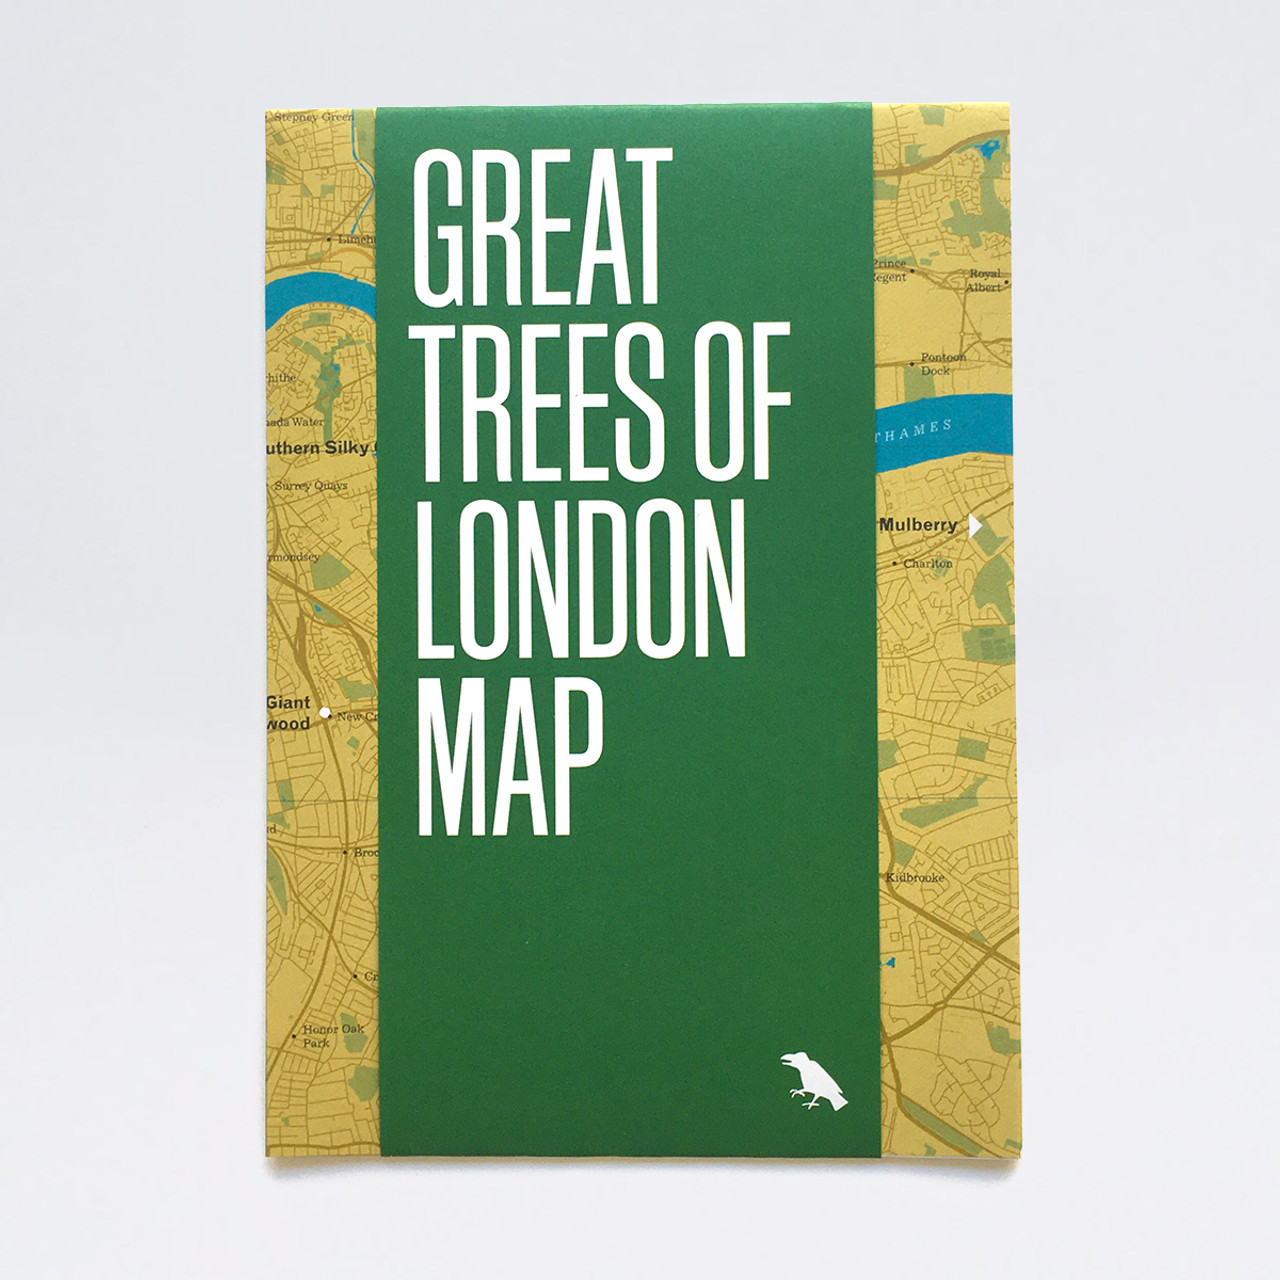 1 Great Trees of London Map Great Trees Maps by Blue Crow Media Guide to the Magnificent Trees of London 